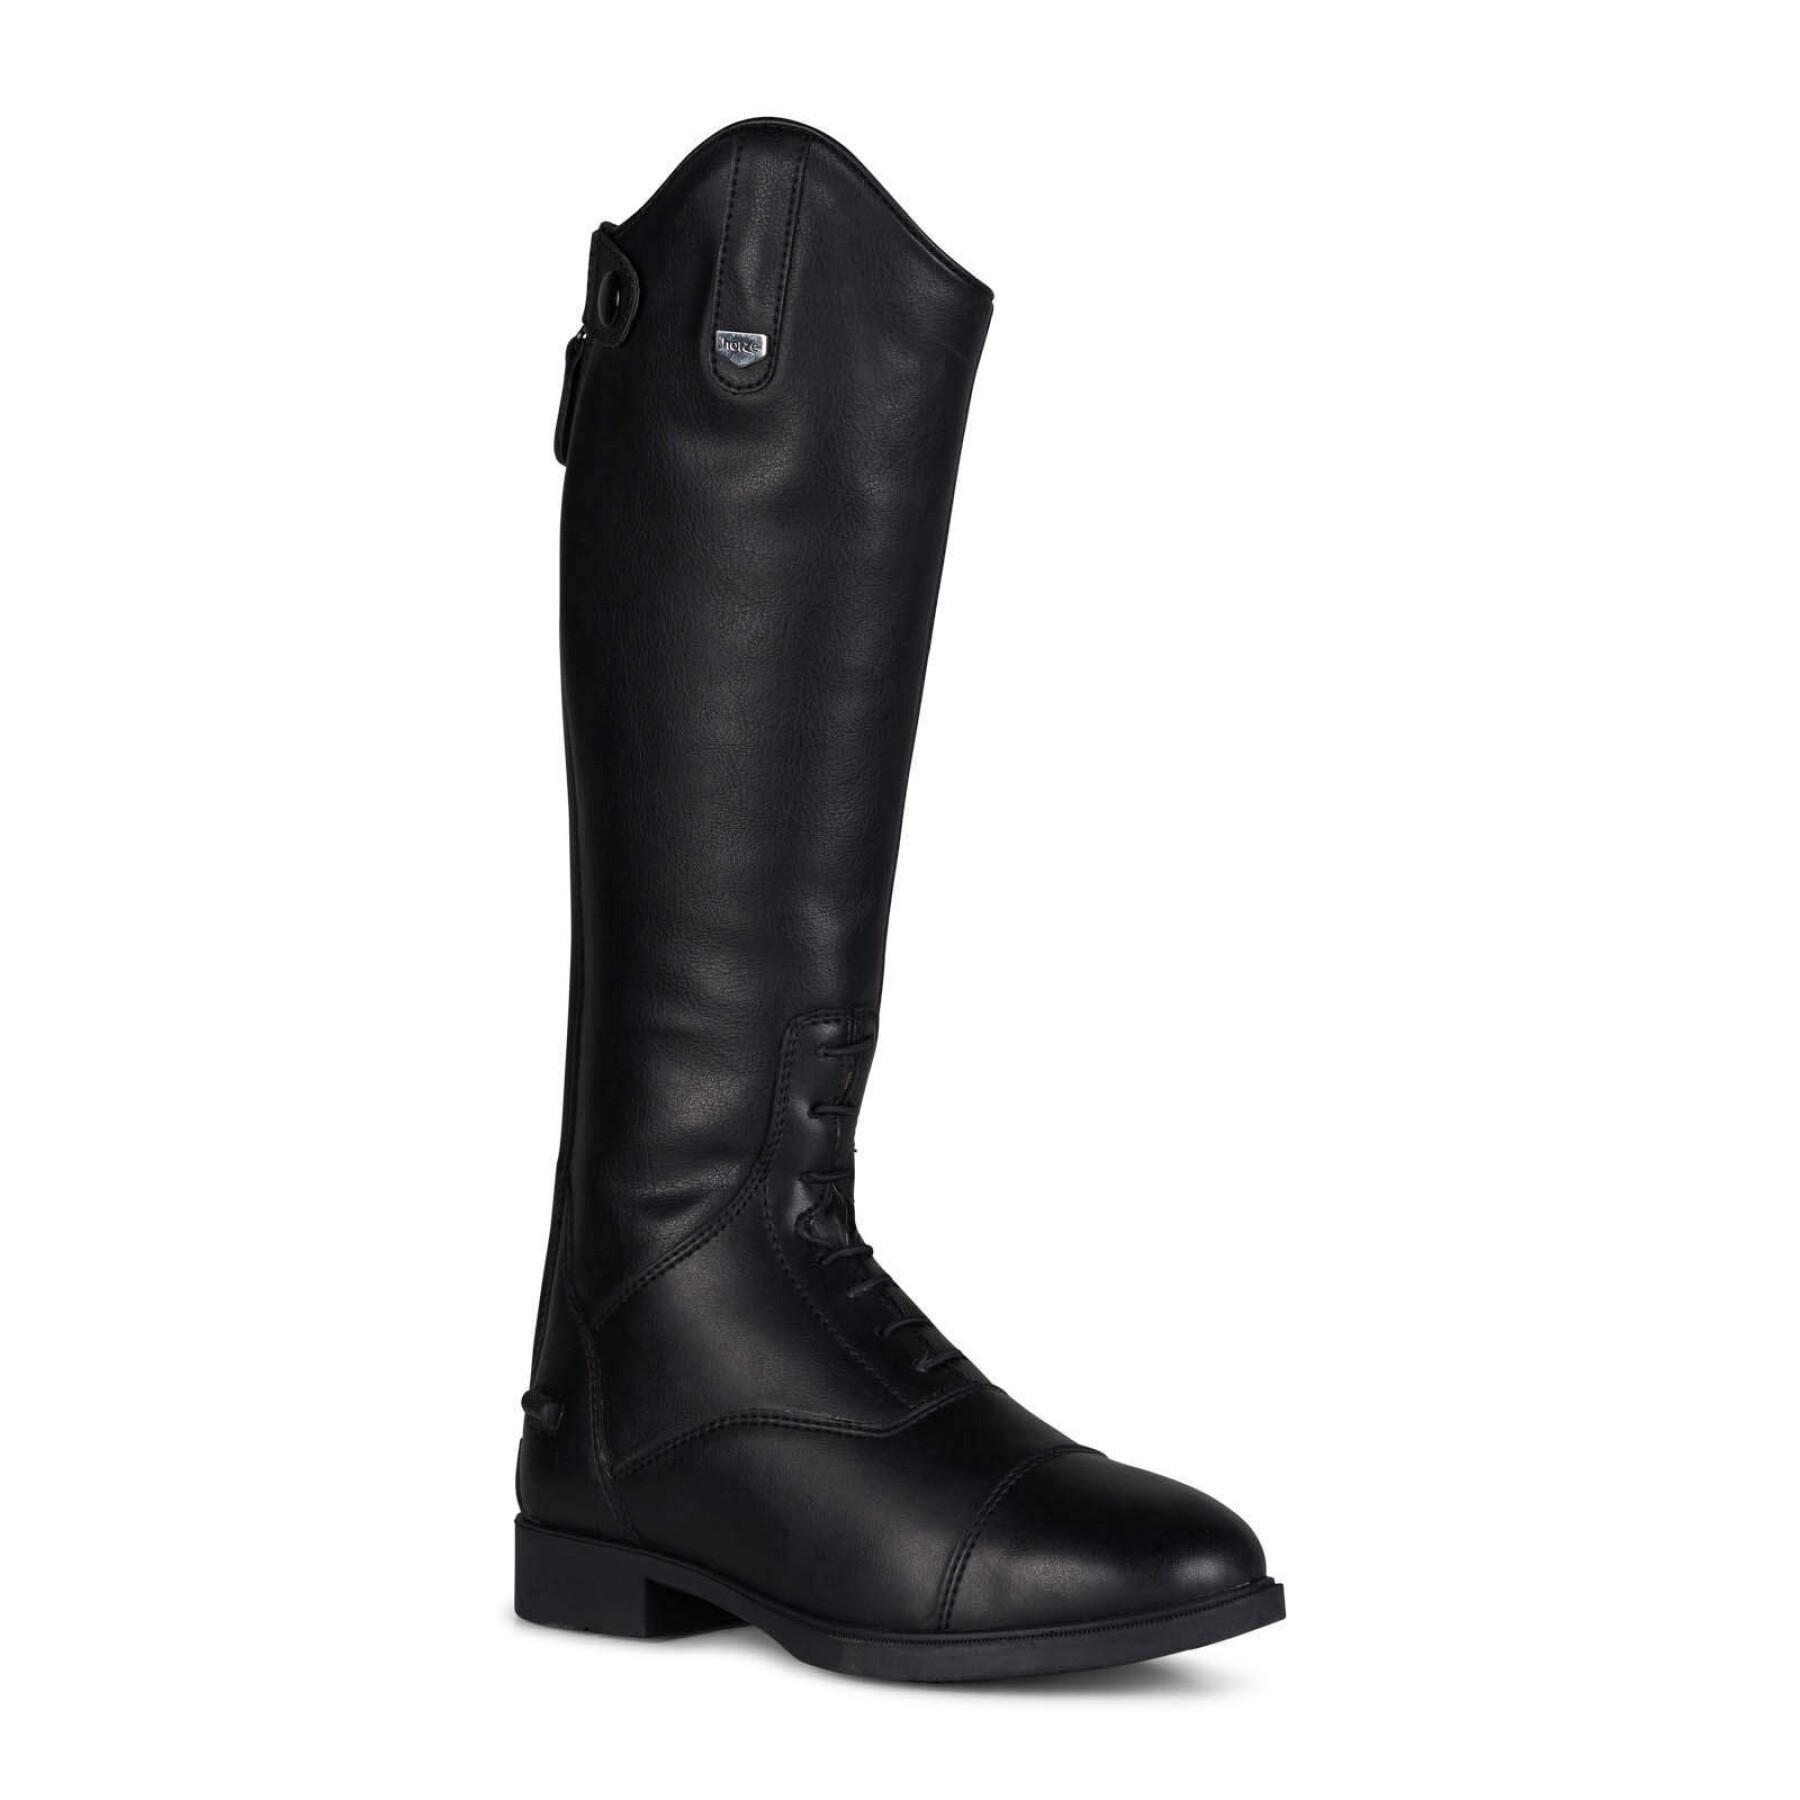 Riding boots for children Horze Rover